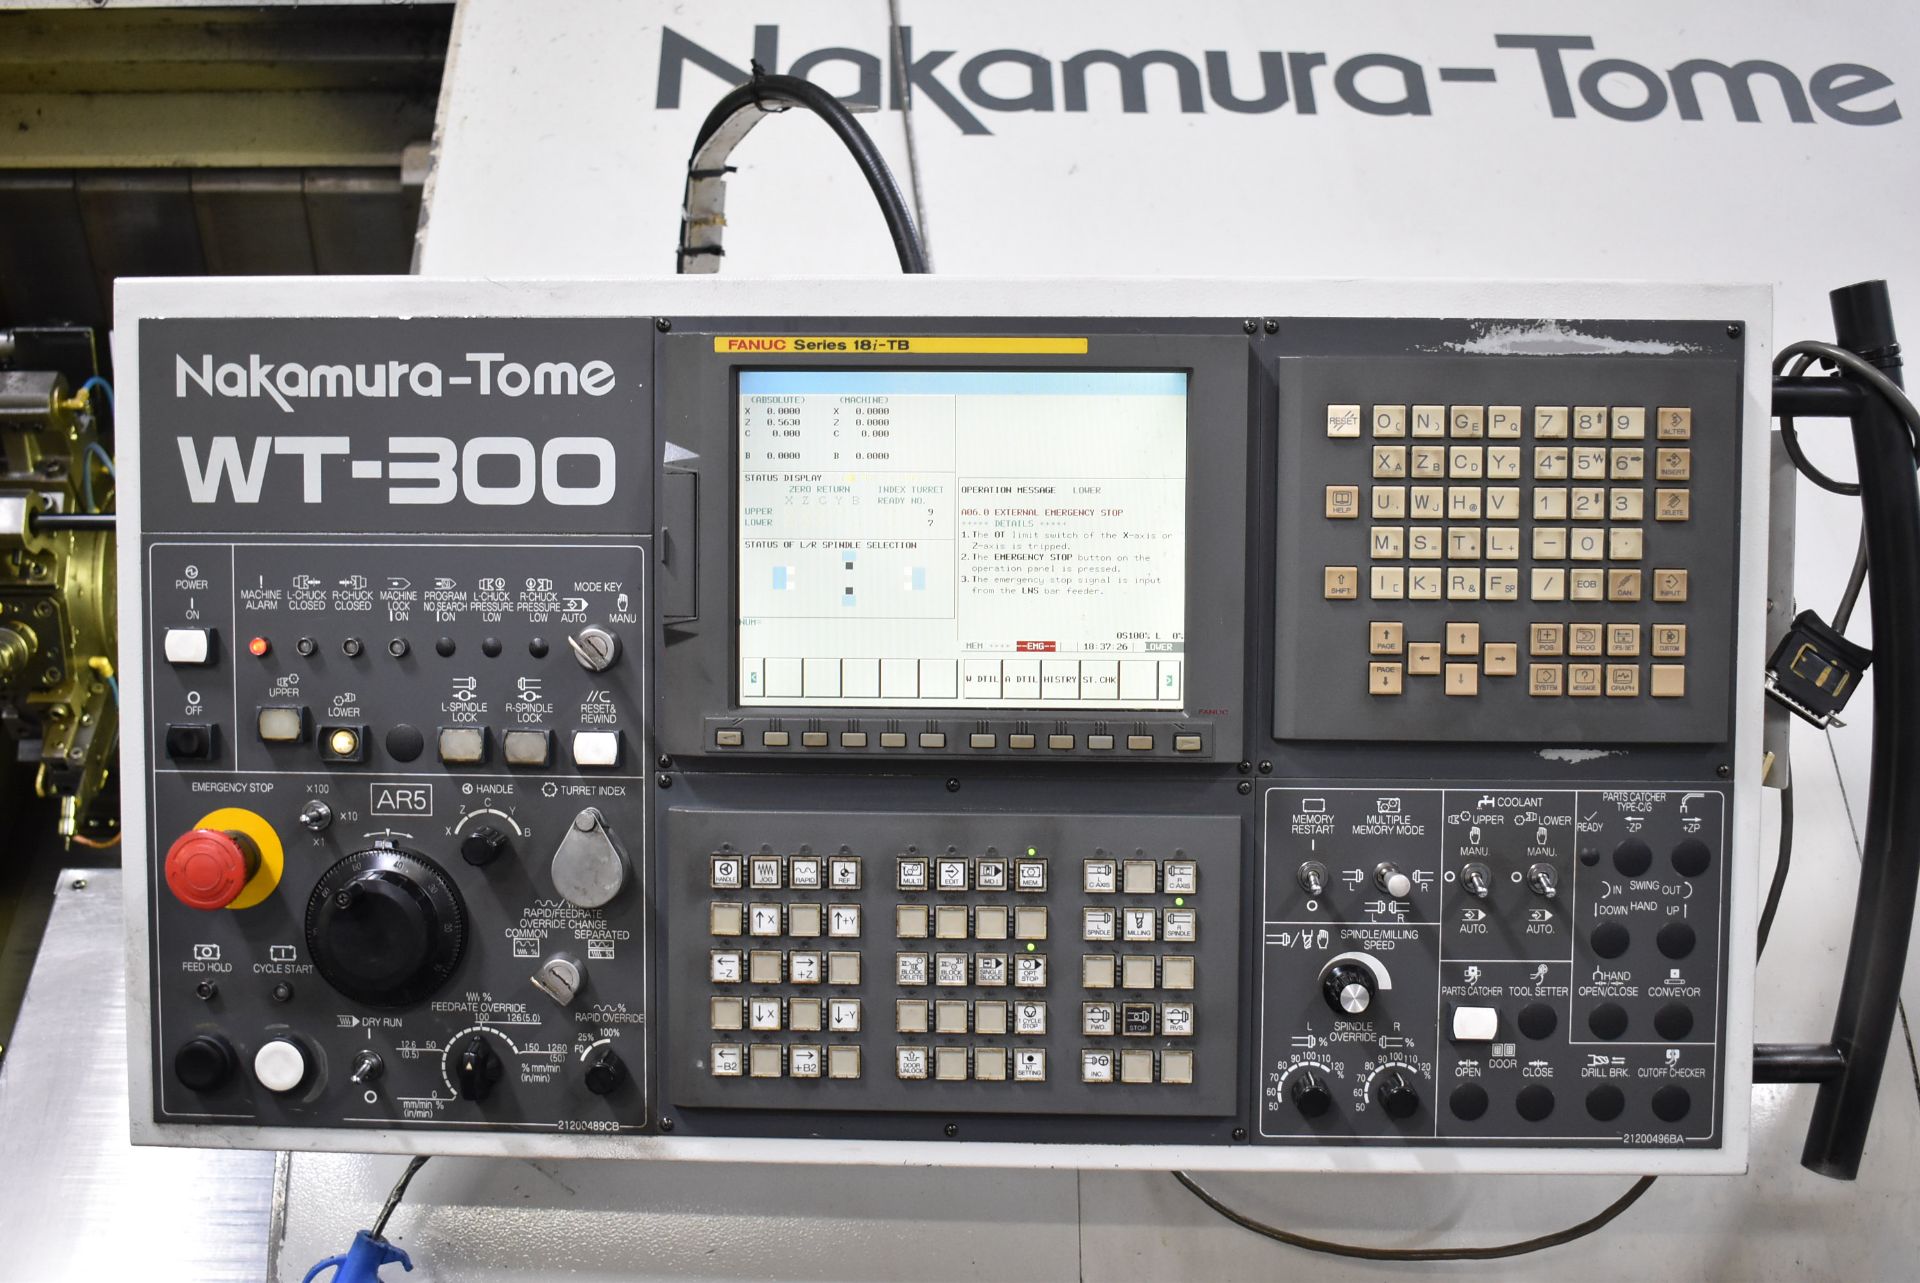 NAKAMURA-TOME (2007) WT-300 MMYS 7-AXIS OPPOSED SPINDLE AND TWIN TURRET CNC MULTI-TASKING CENTER - Image 7 of 15